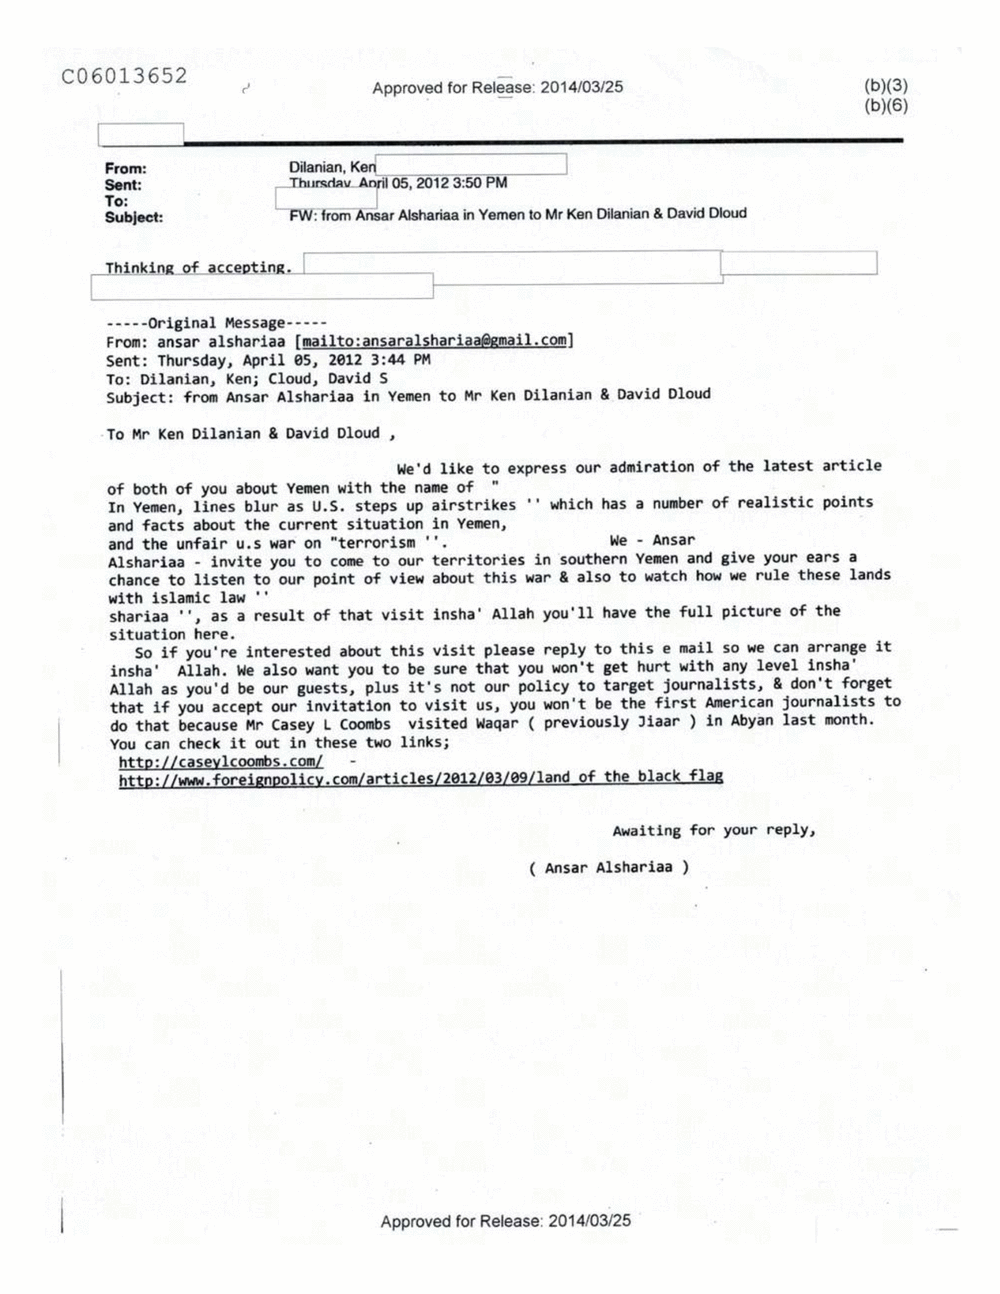 Page 503 from Email Correspondence Between Reporters and CIA Flacks